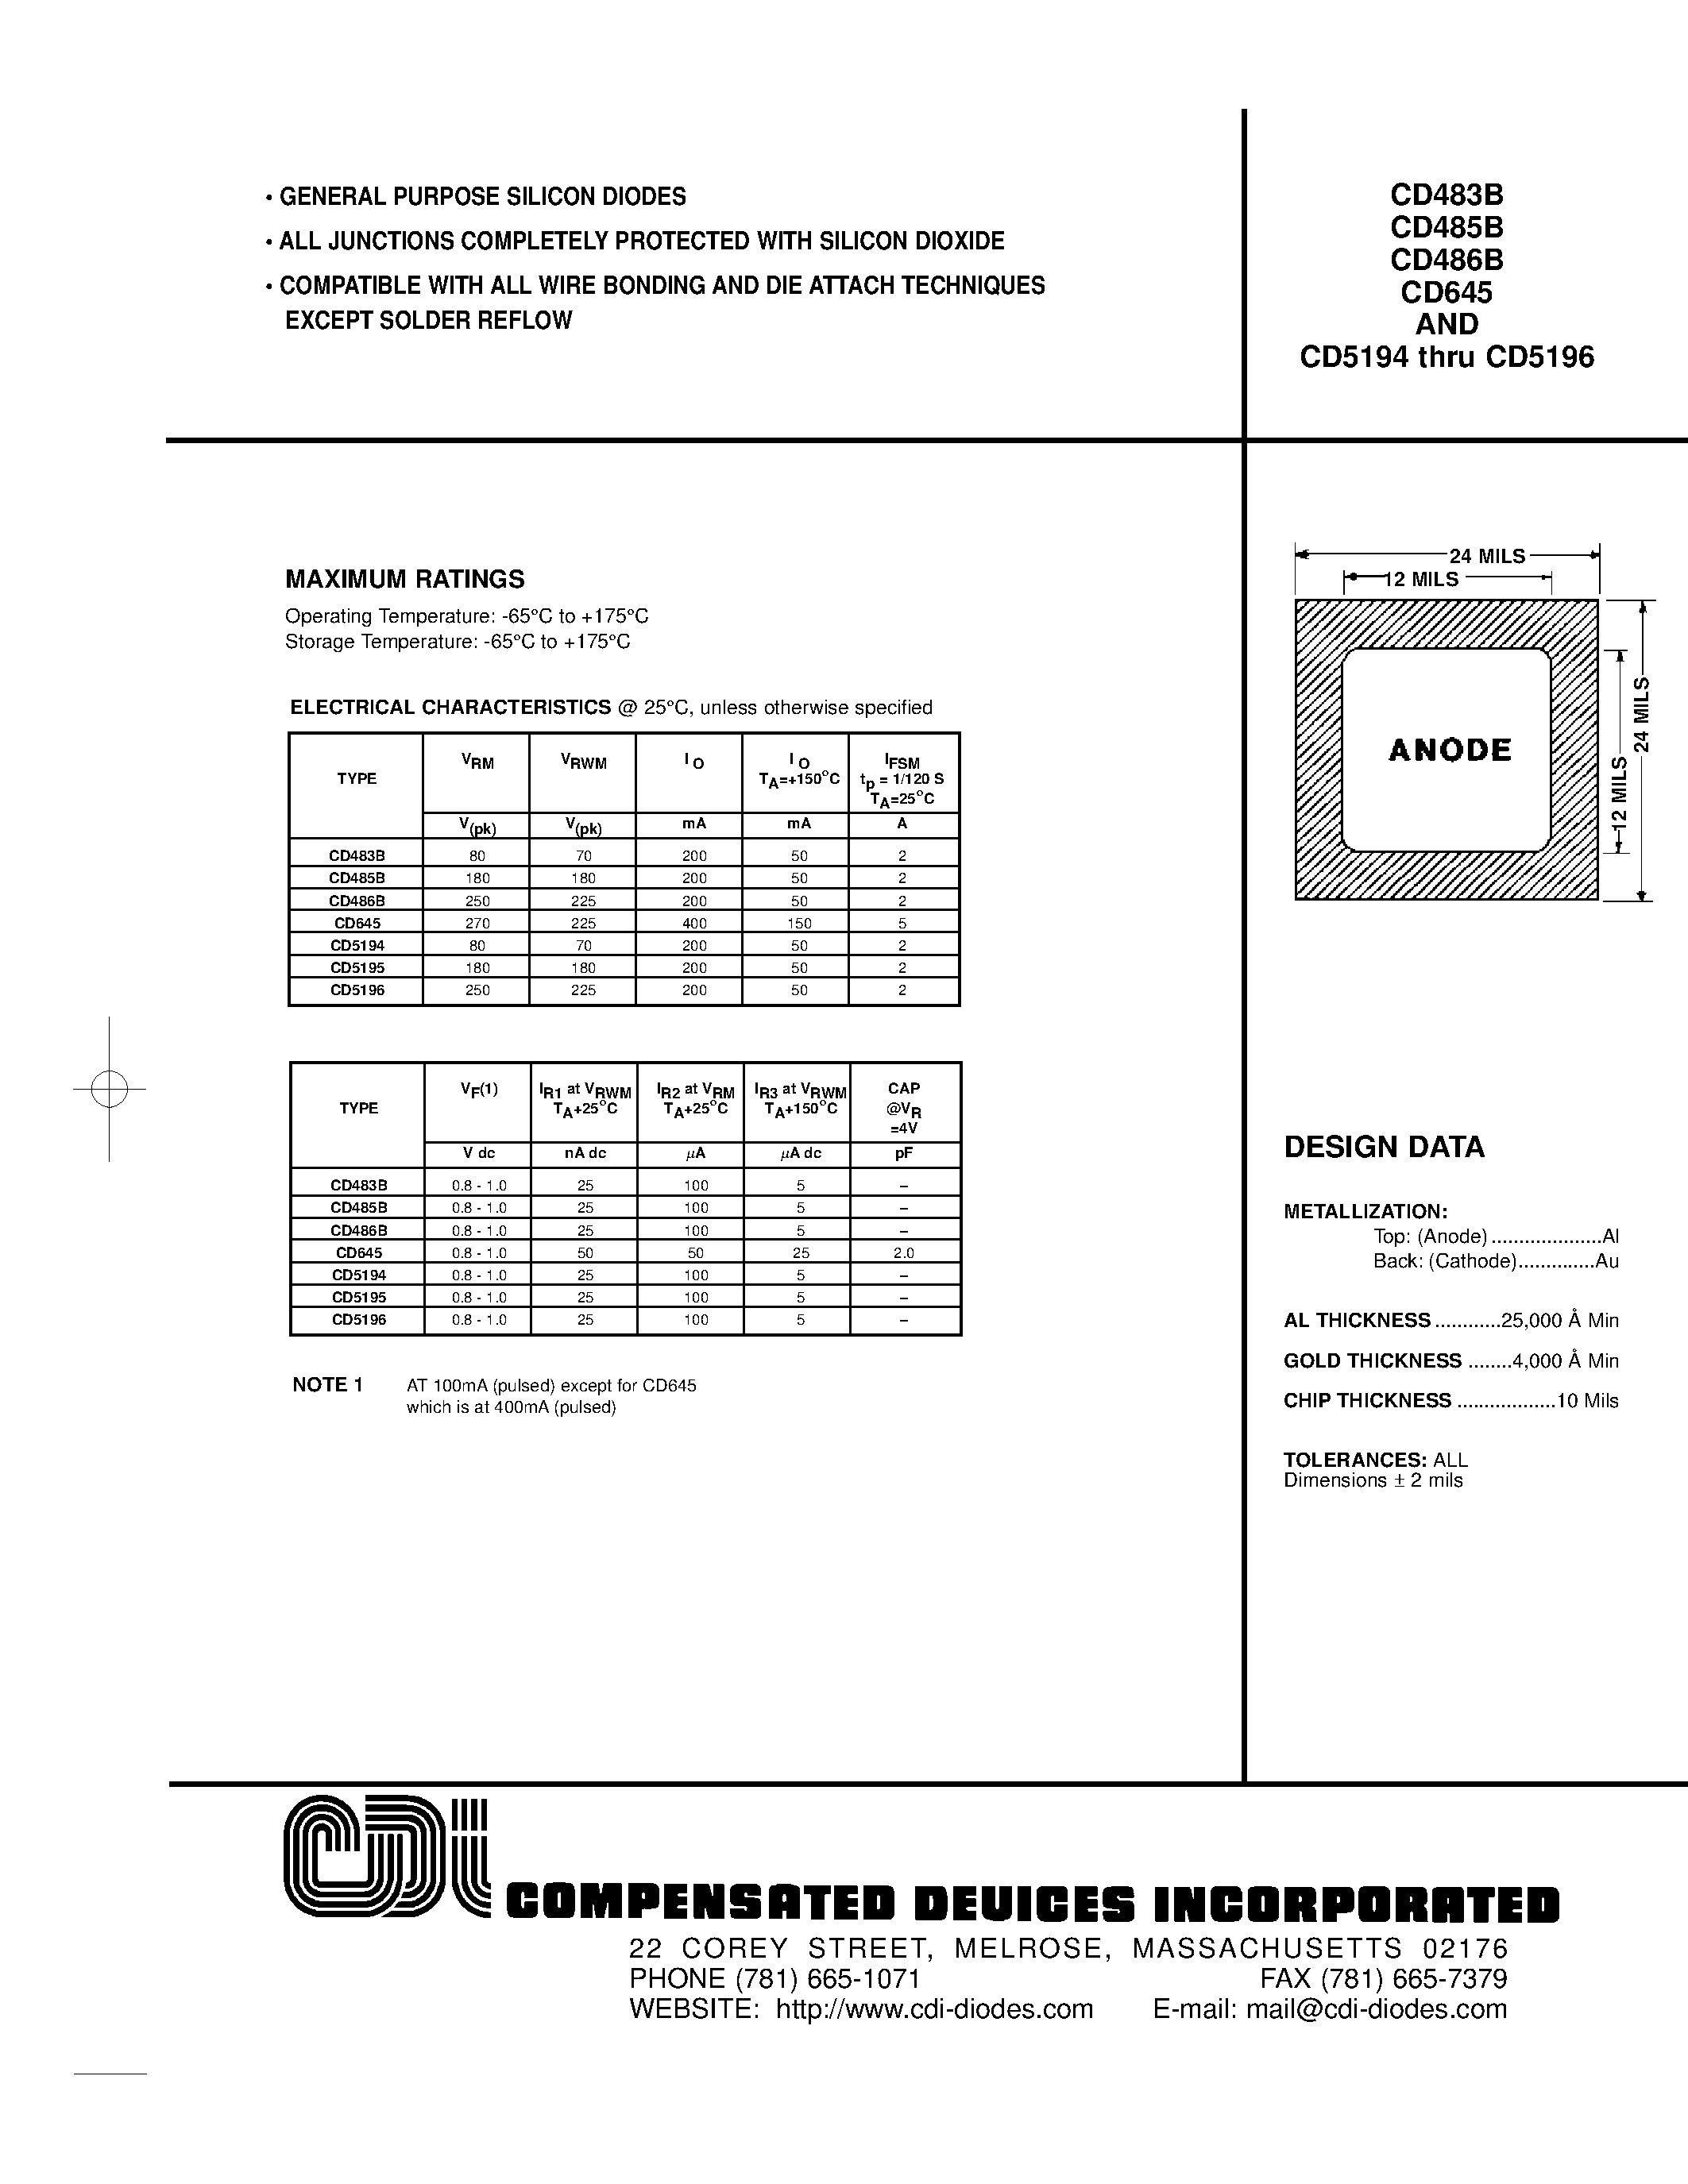 Даташит CD5194 - GENERAL PURPOSE SILICON DIODES страница 1